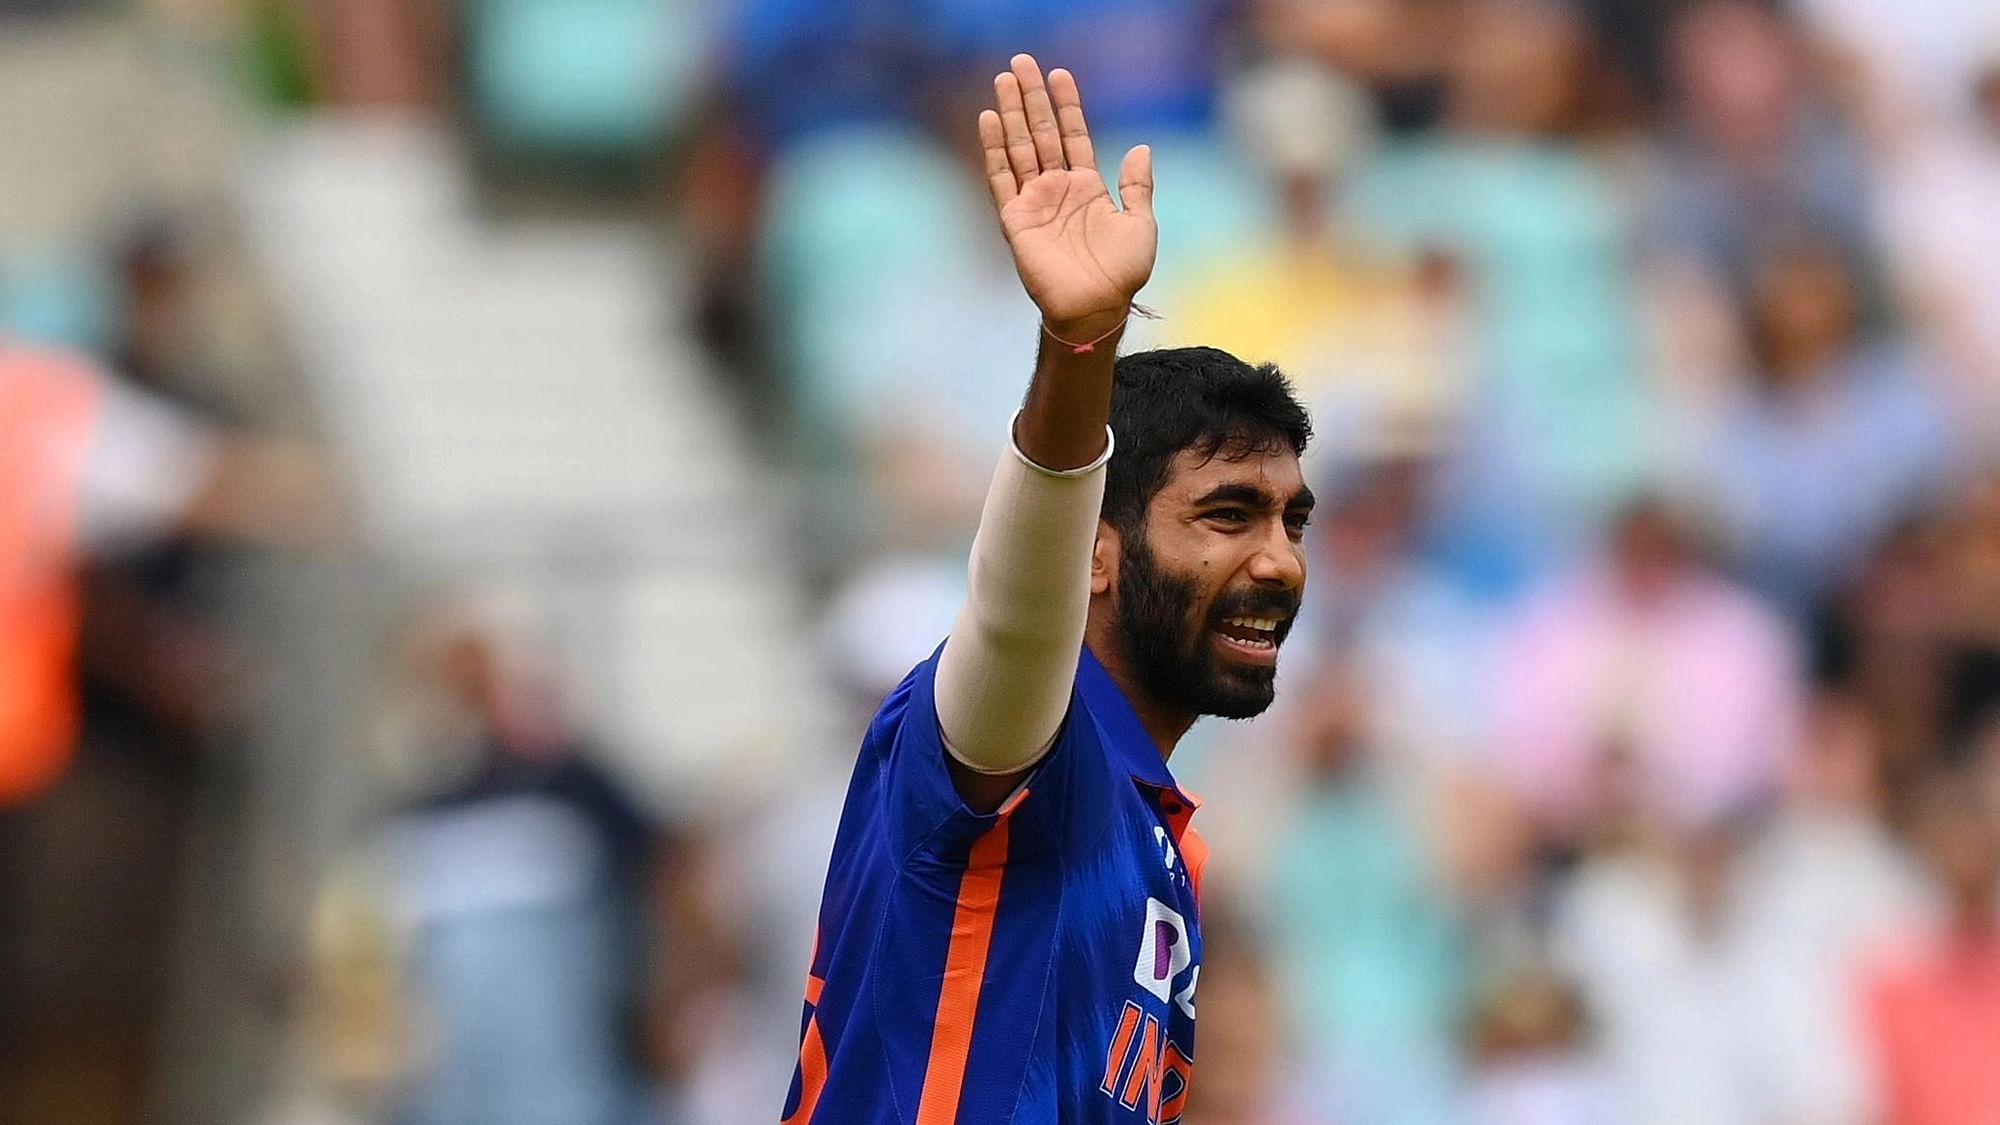 <div class="paragraphs"><p> Jasprit Bumrah dropped to second place&nbsp;among bowlers in the latest ICC ODI rankings after missing the final match against England due to a back spasm.&nbsp; &nbsp;</p></div>